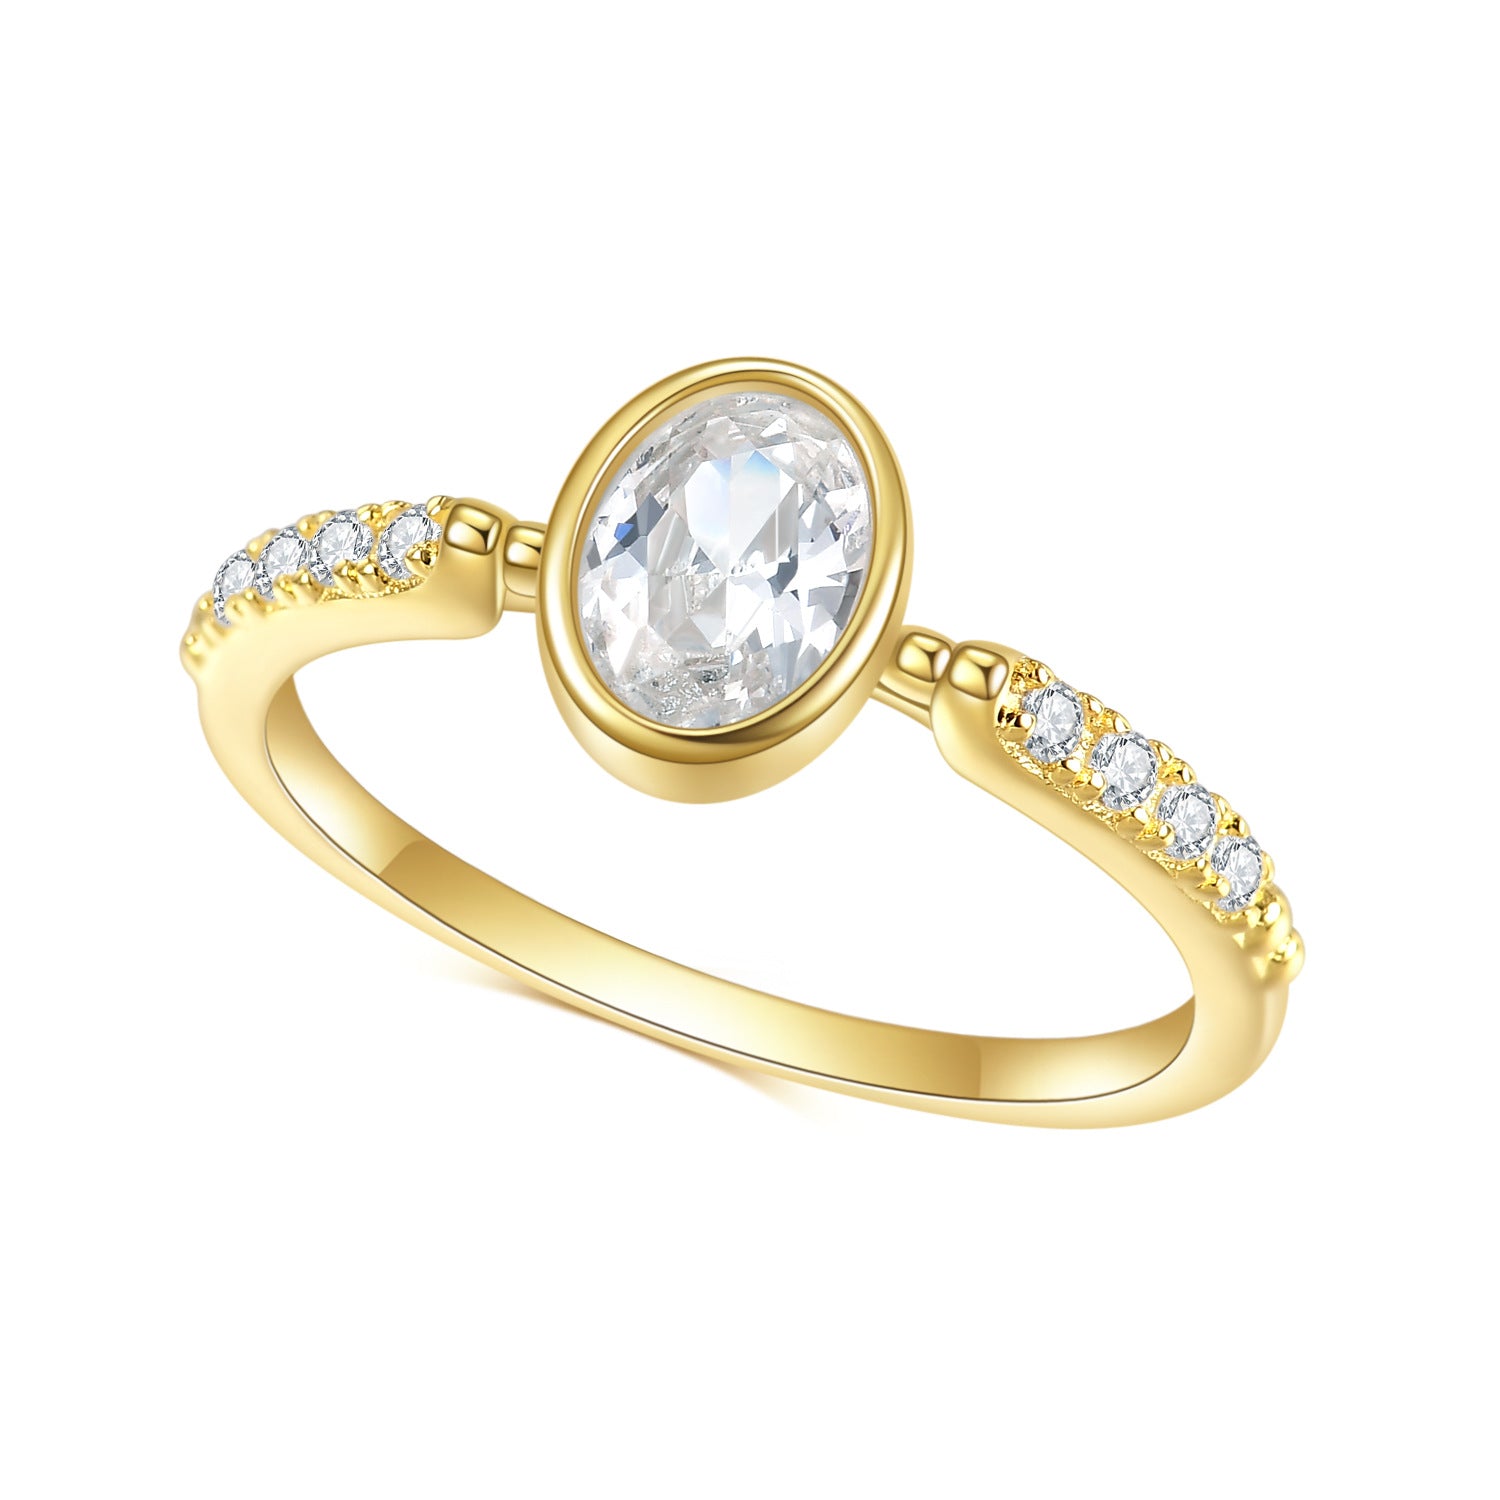 5A Zircon S925 Sterling Silver 14k Gold Plated Ring for Women